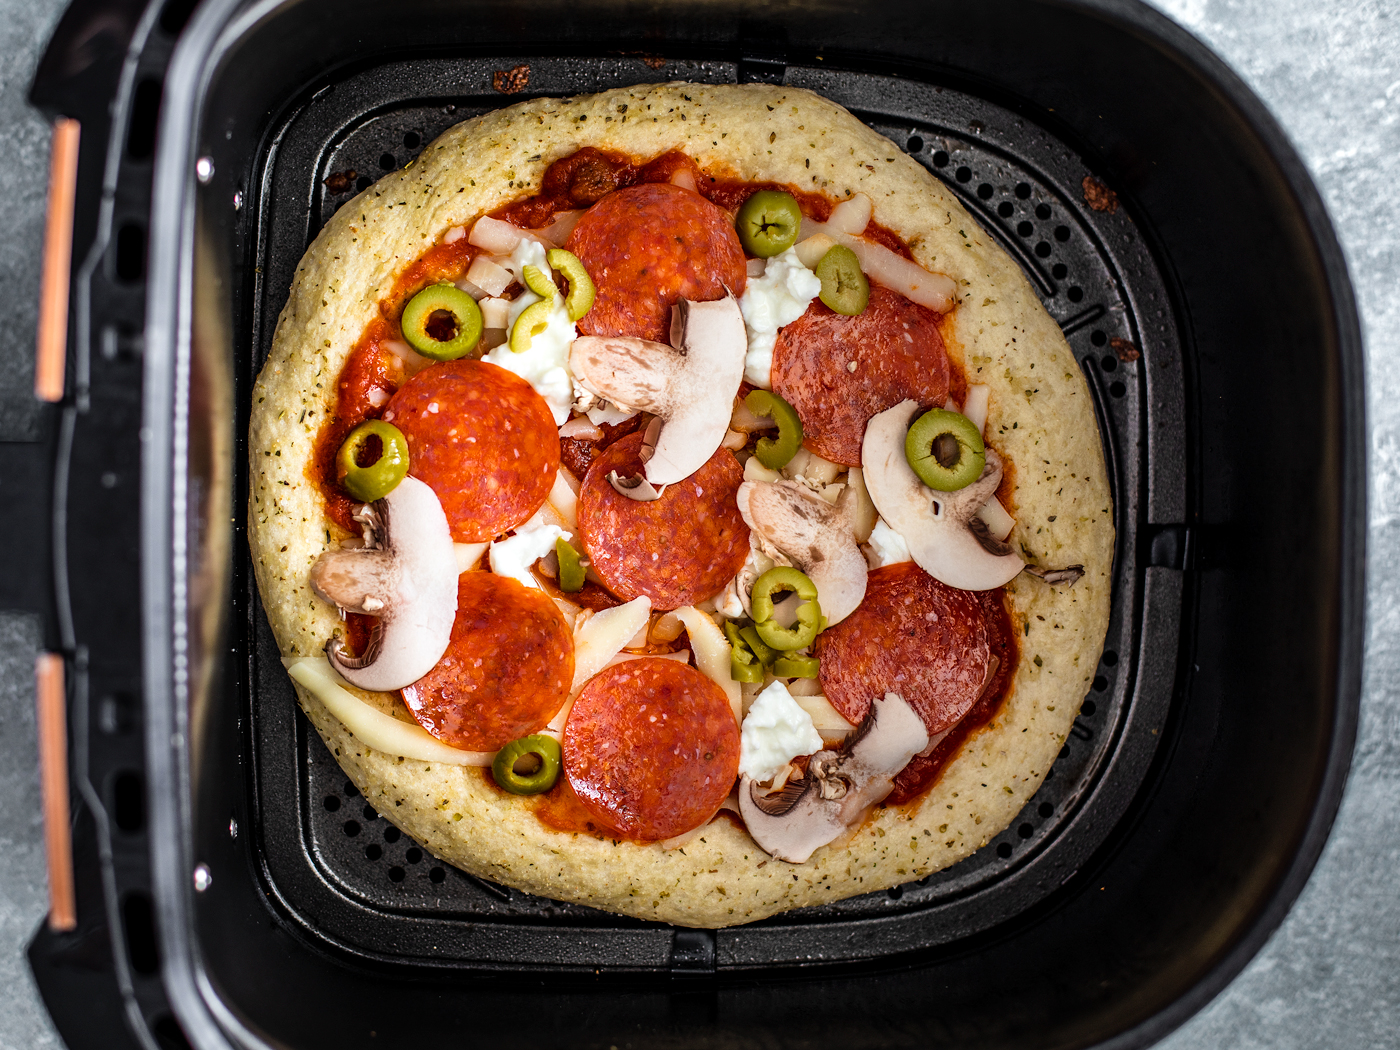 Uncooked pizza in air fryer basket.